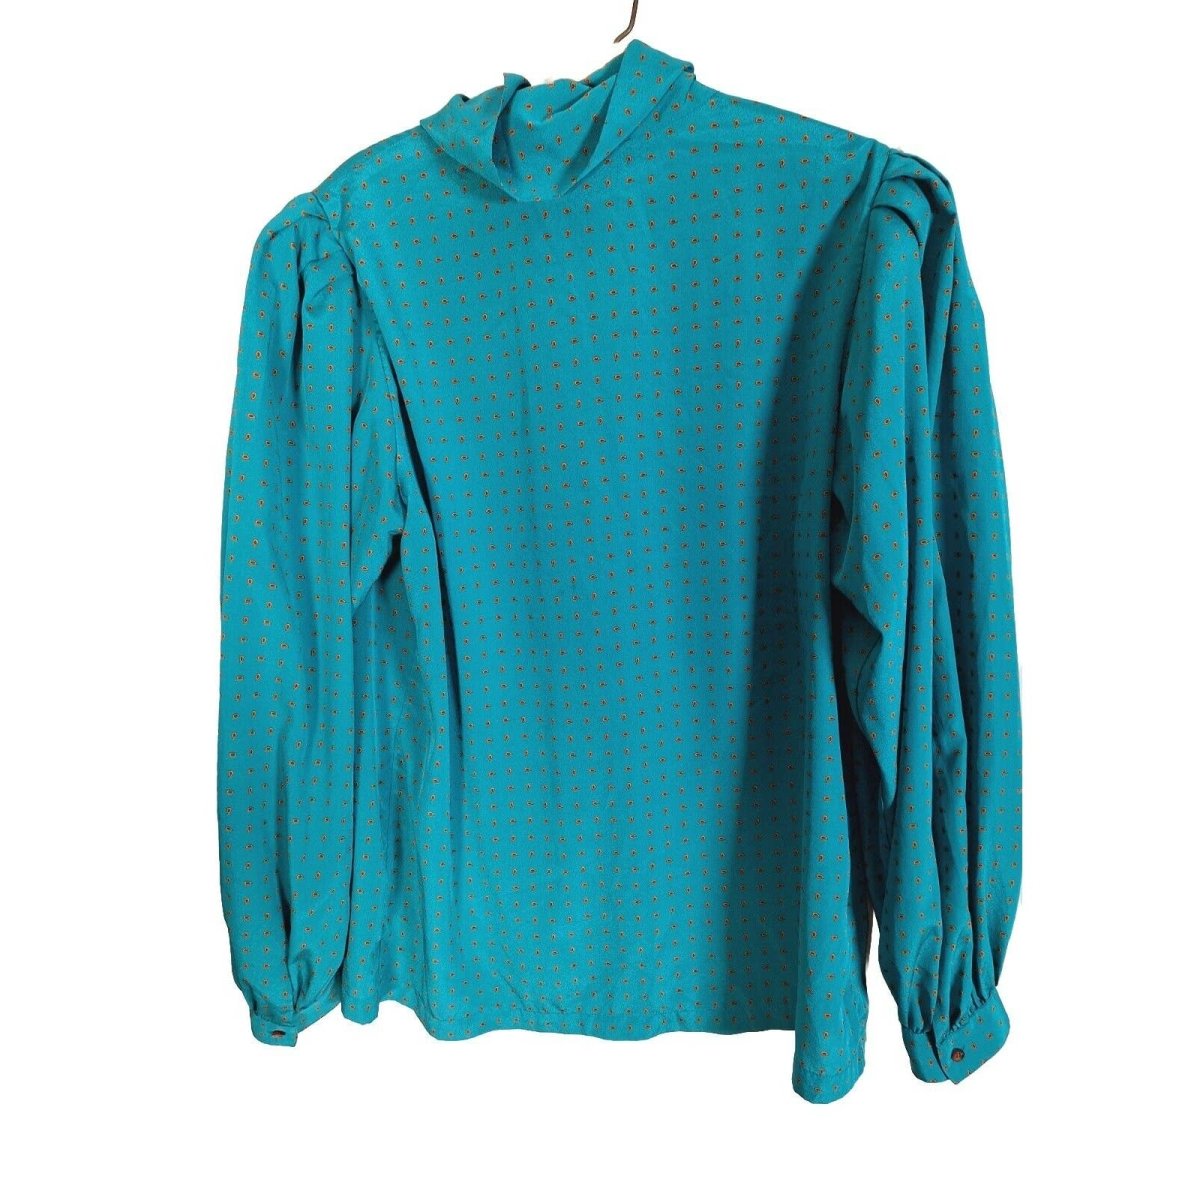 Vintage 80s Teal High Neck Balloon Sleeve Blouse Women's Size 14 L/XL - themallvintage The Mall Vintage